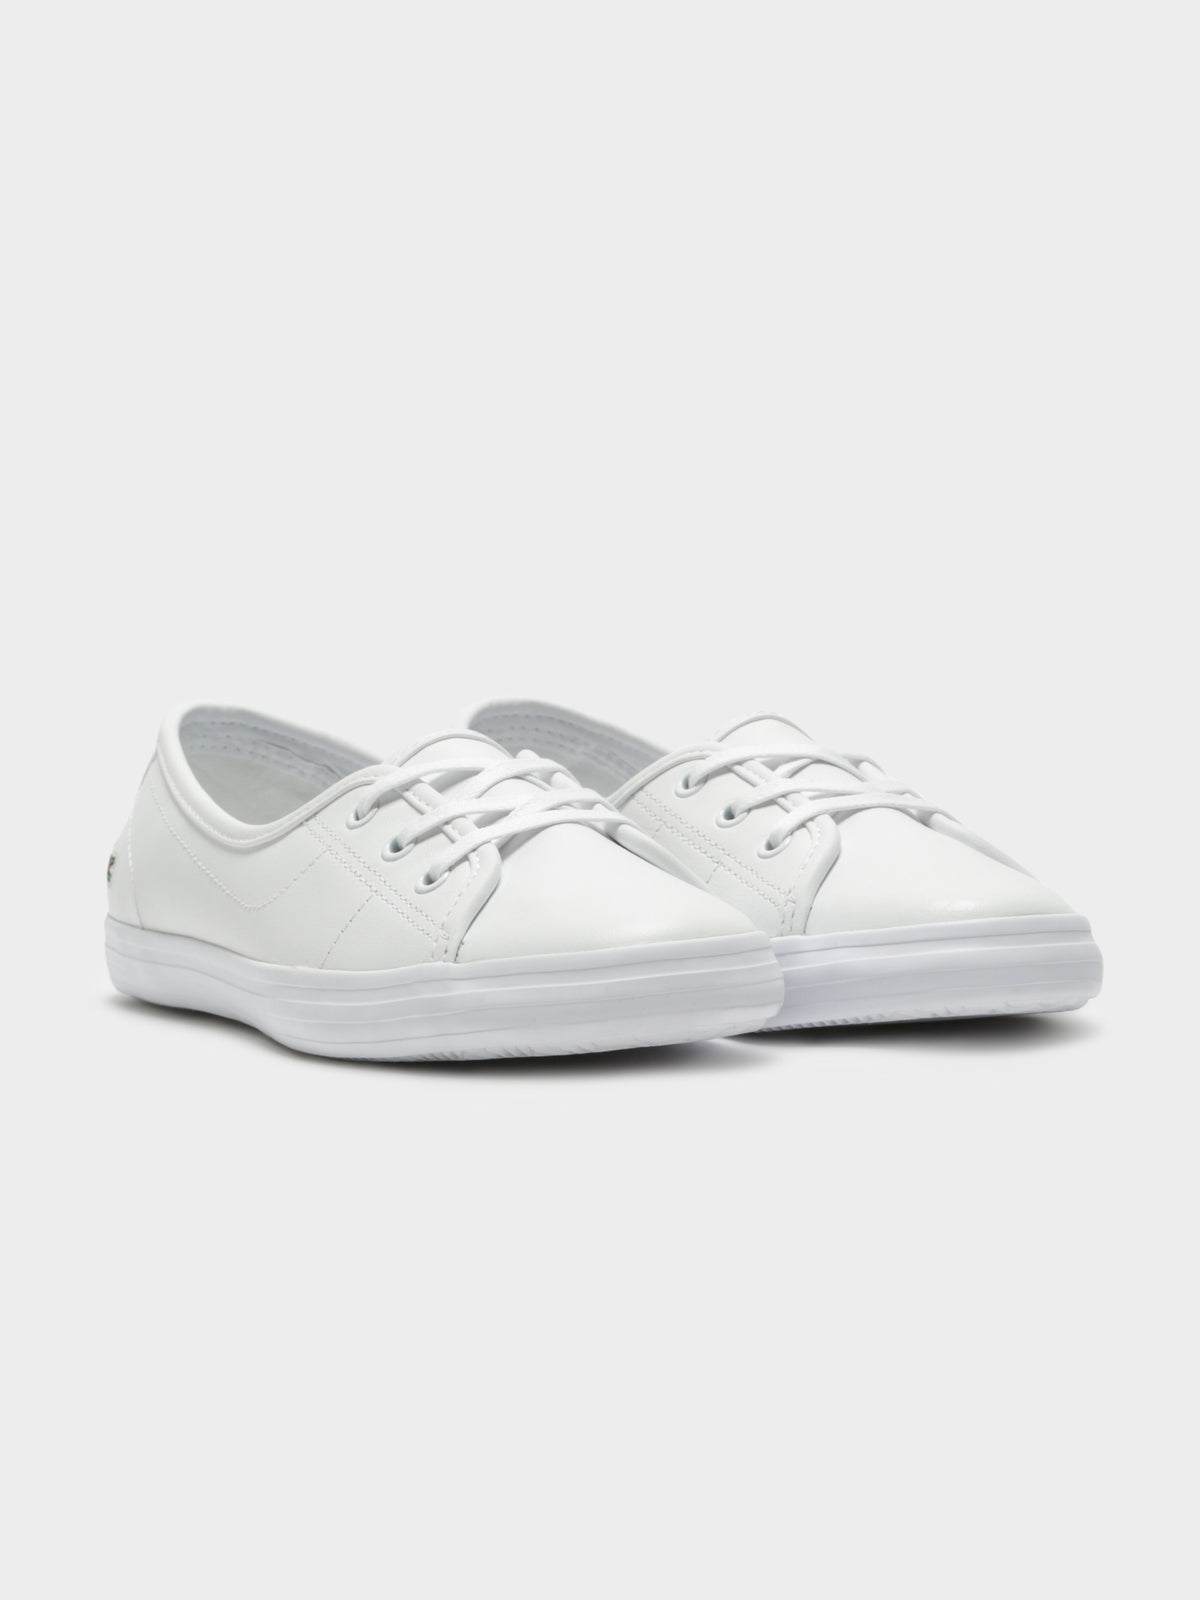 Womens Ziane Chunky Sneakers in White